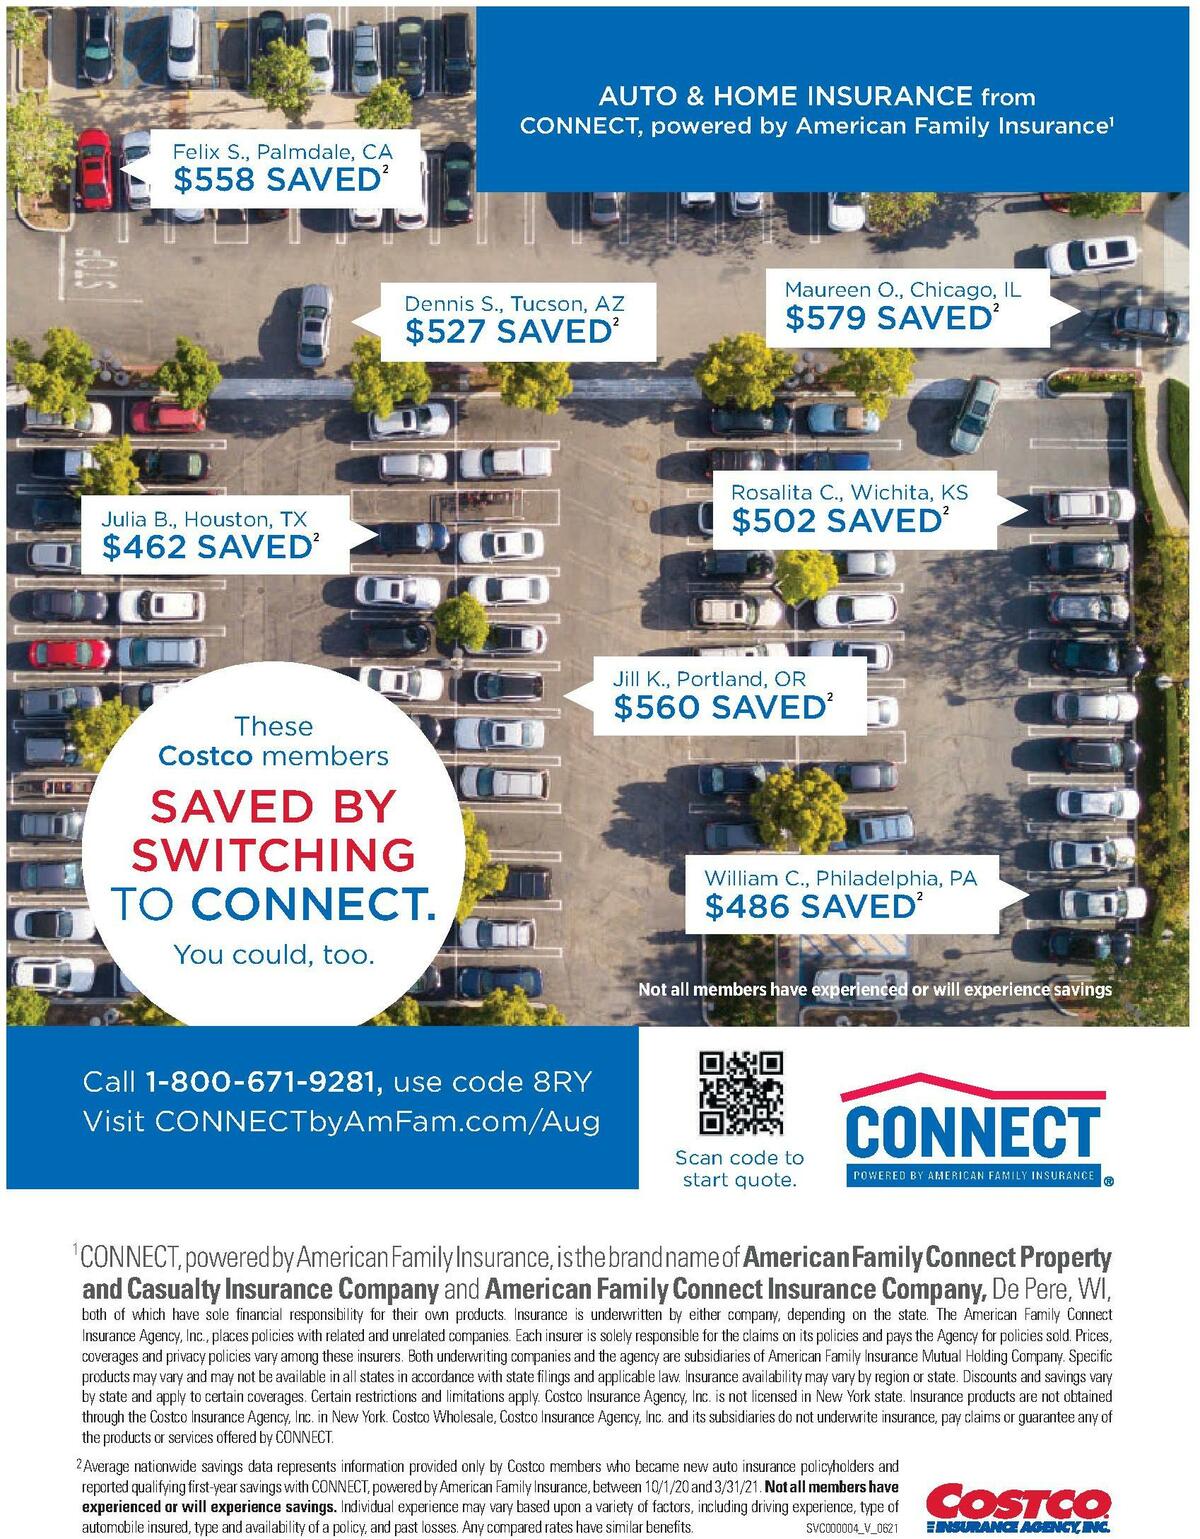 Costco Connection August Weekly Ad from August 1